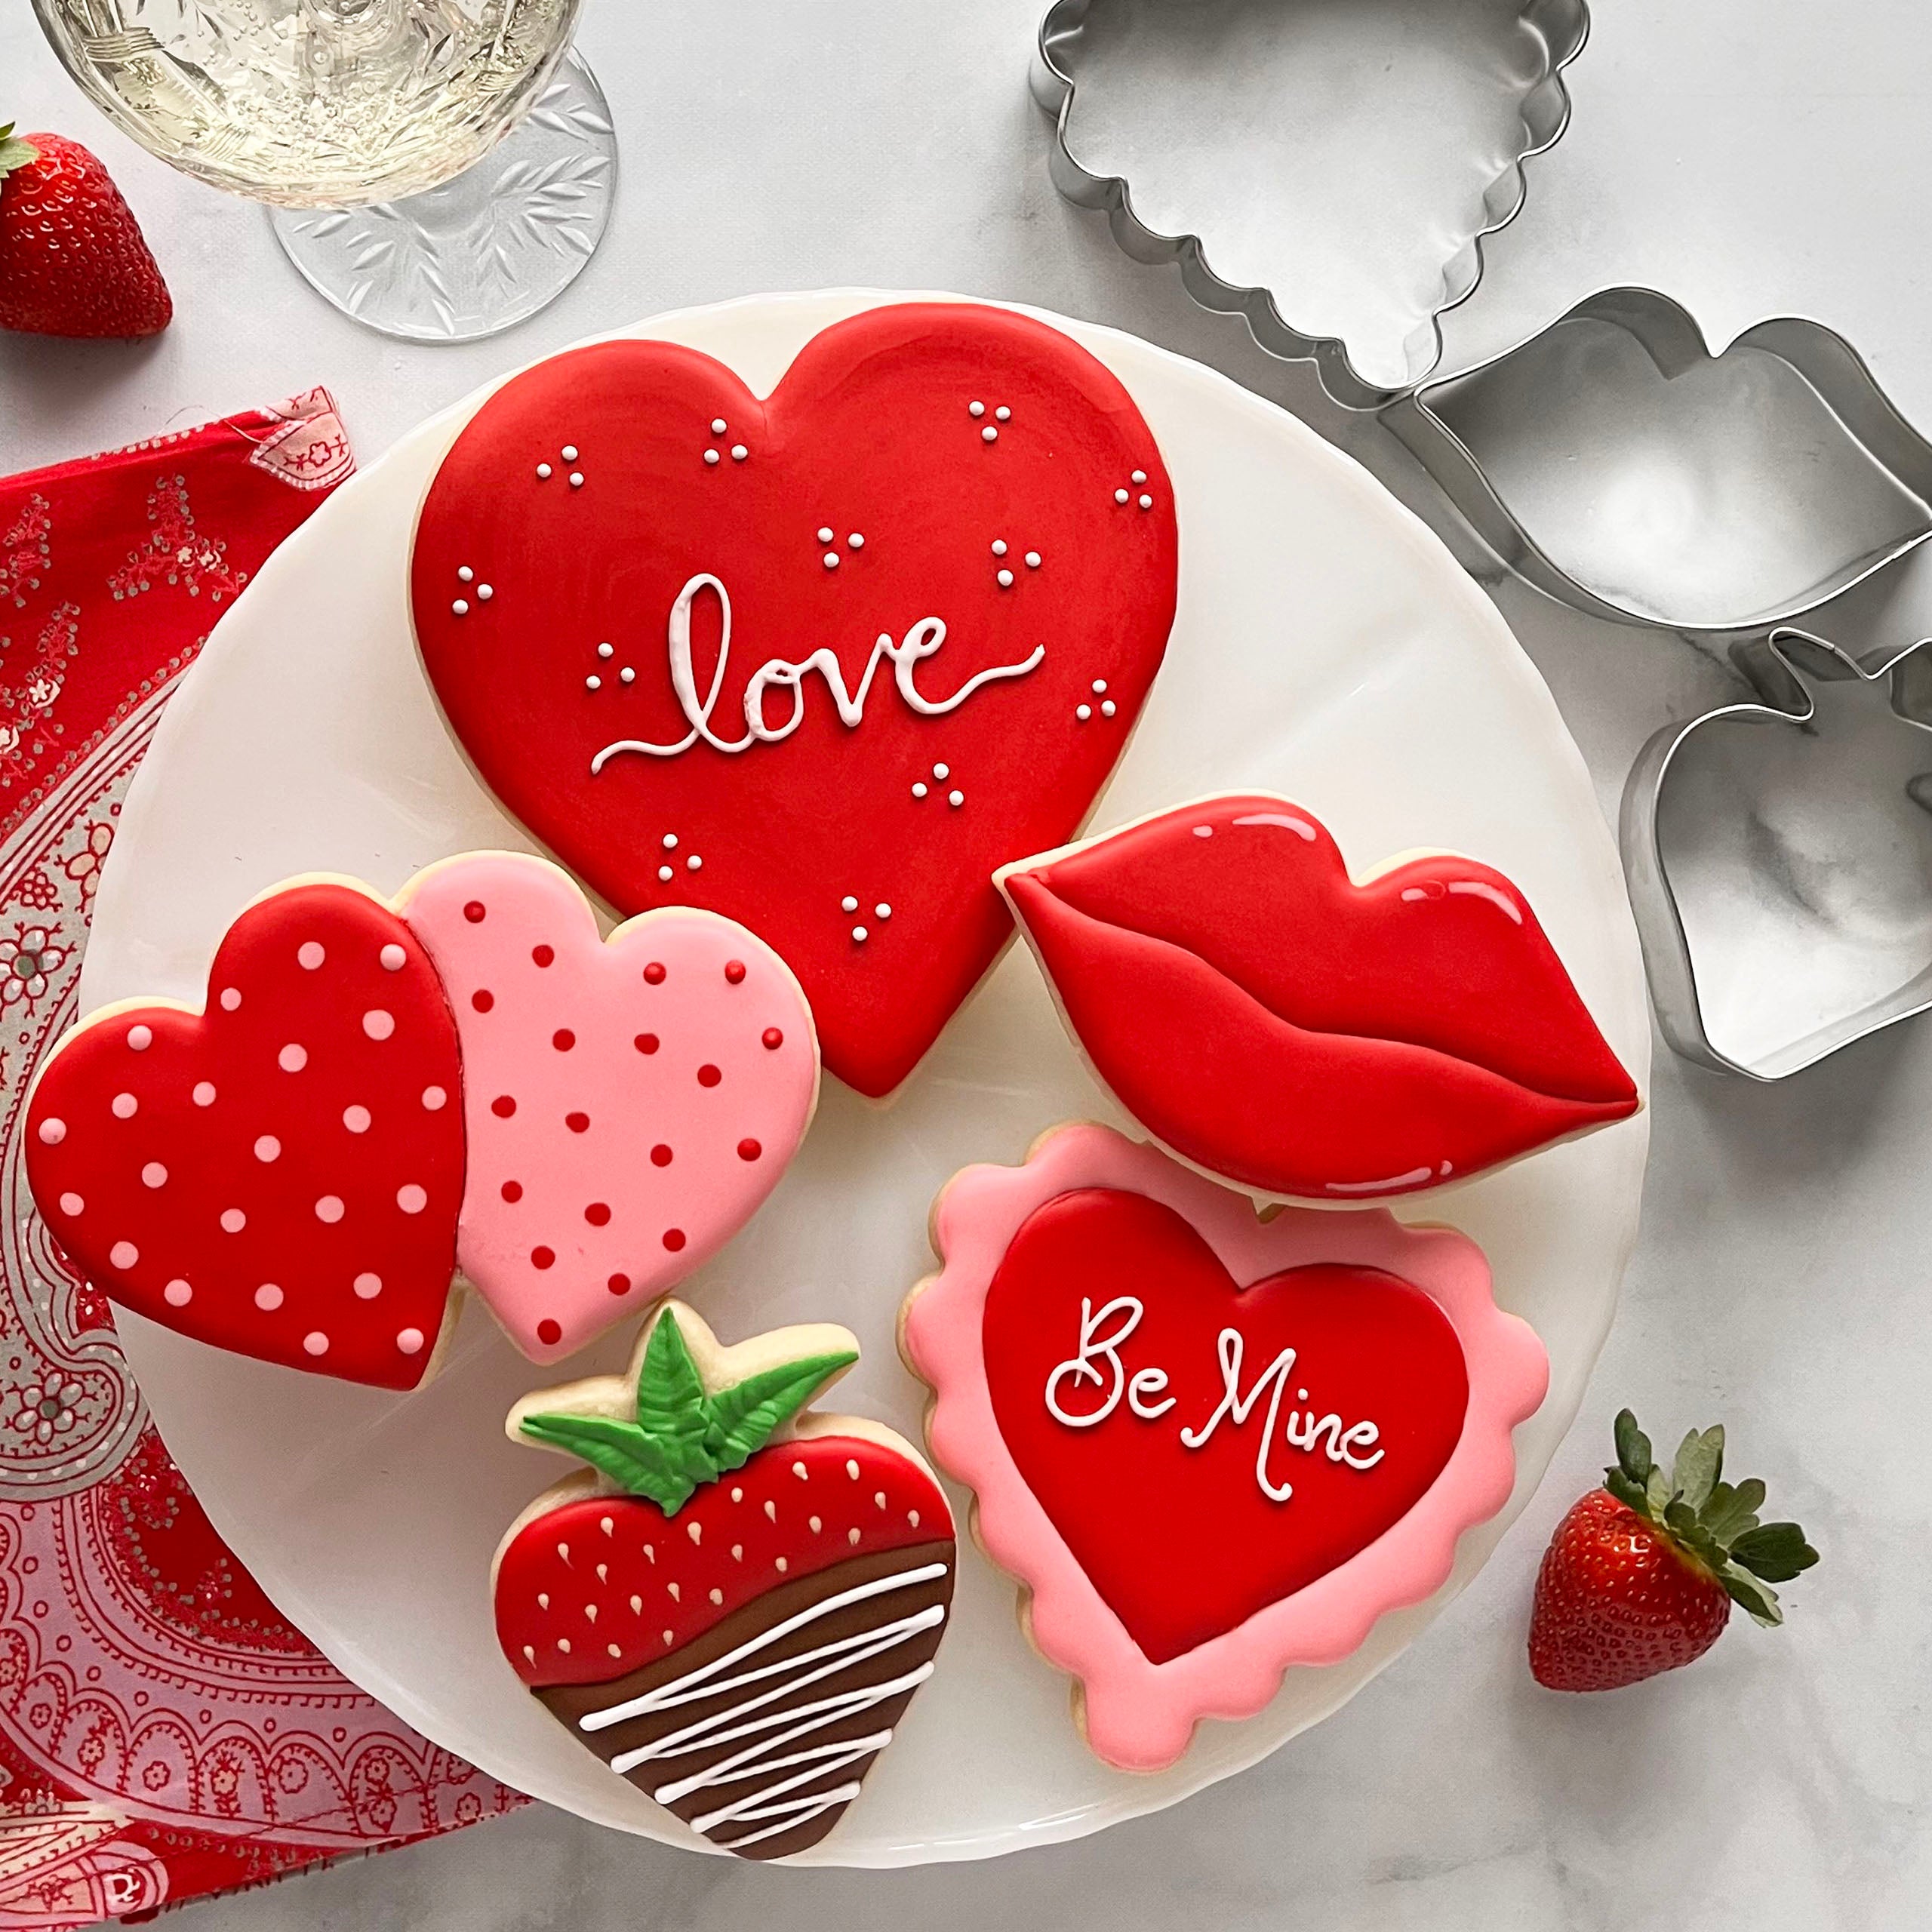 Heart and Valentine's Day related shaped cookies on a plate with assorted cookie cutters on a table